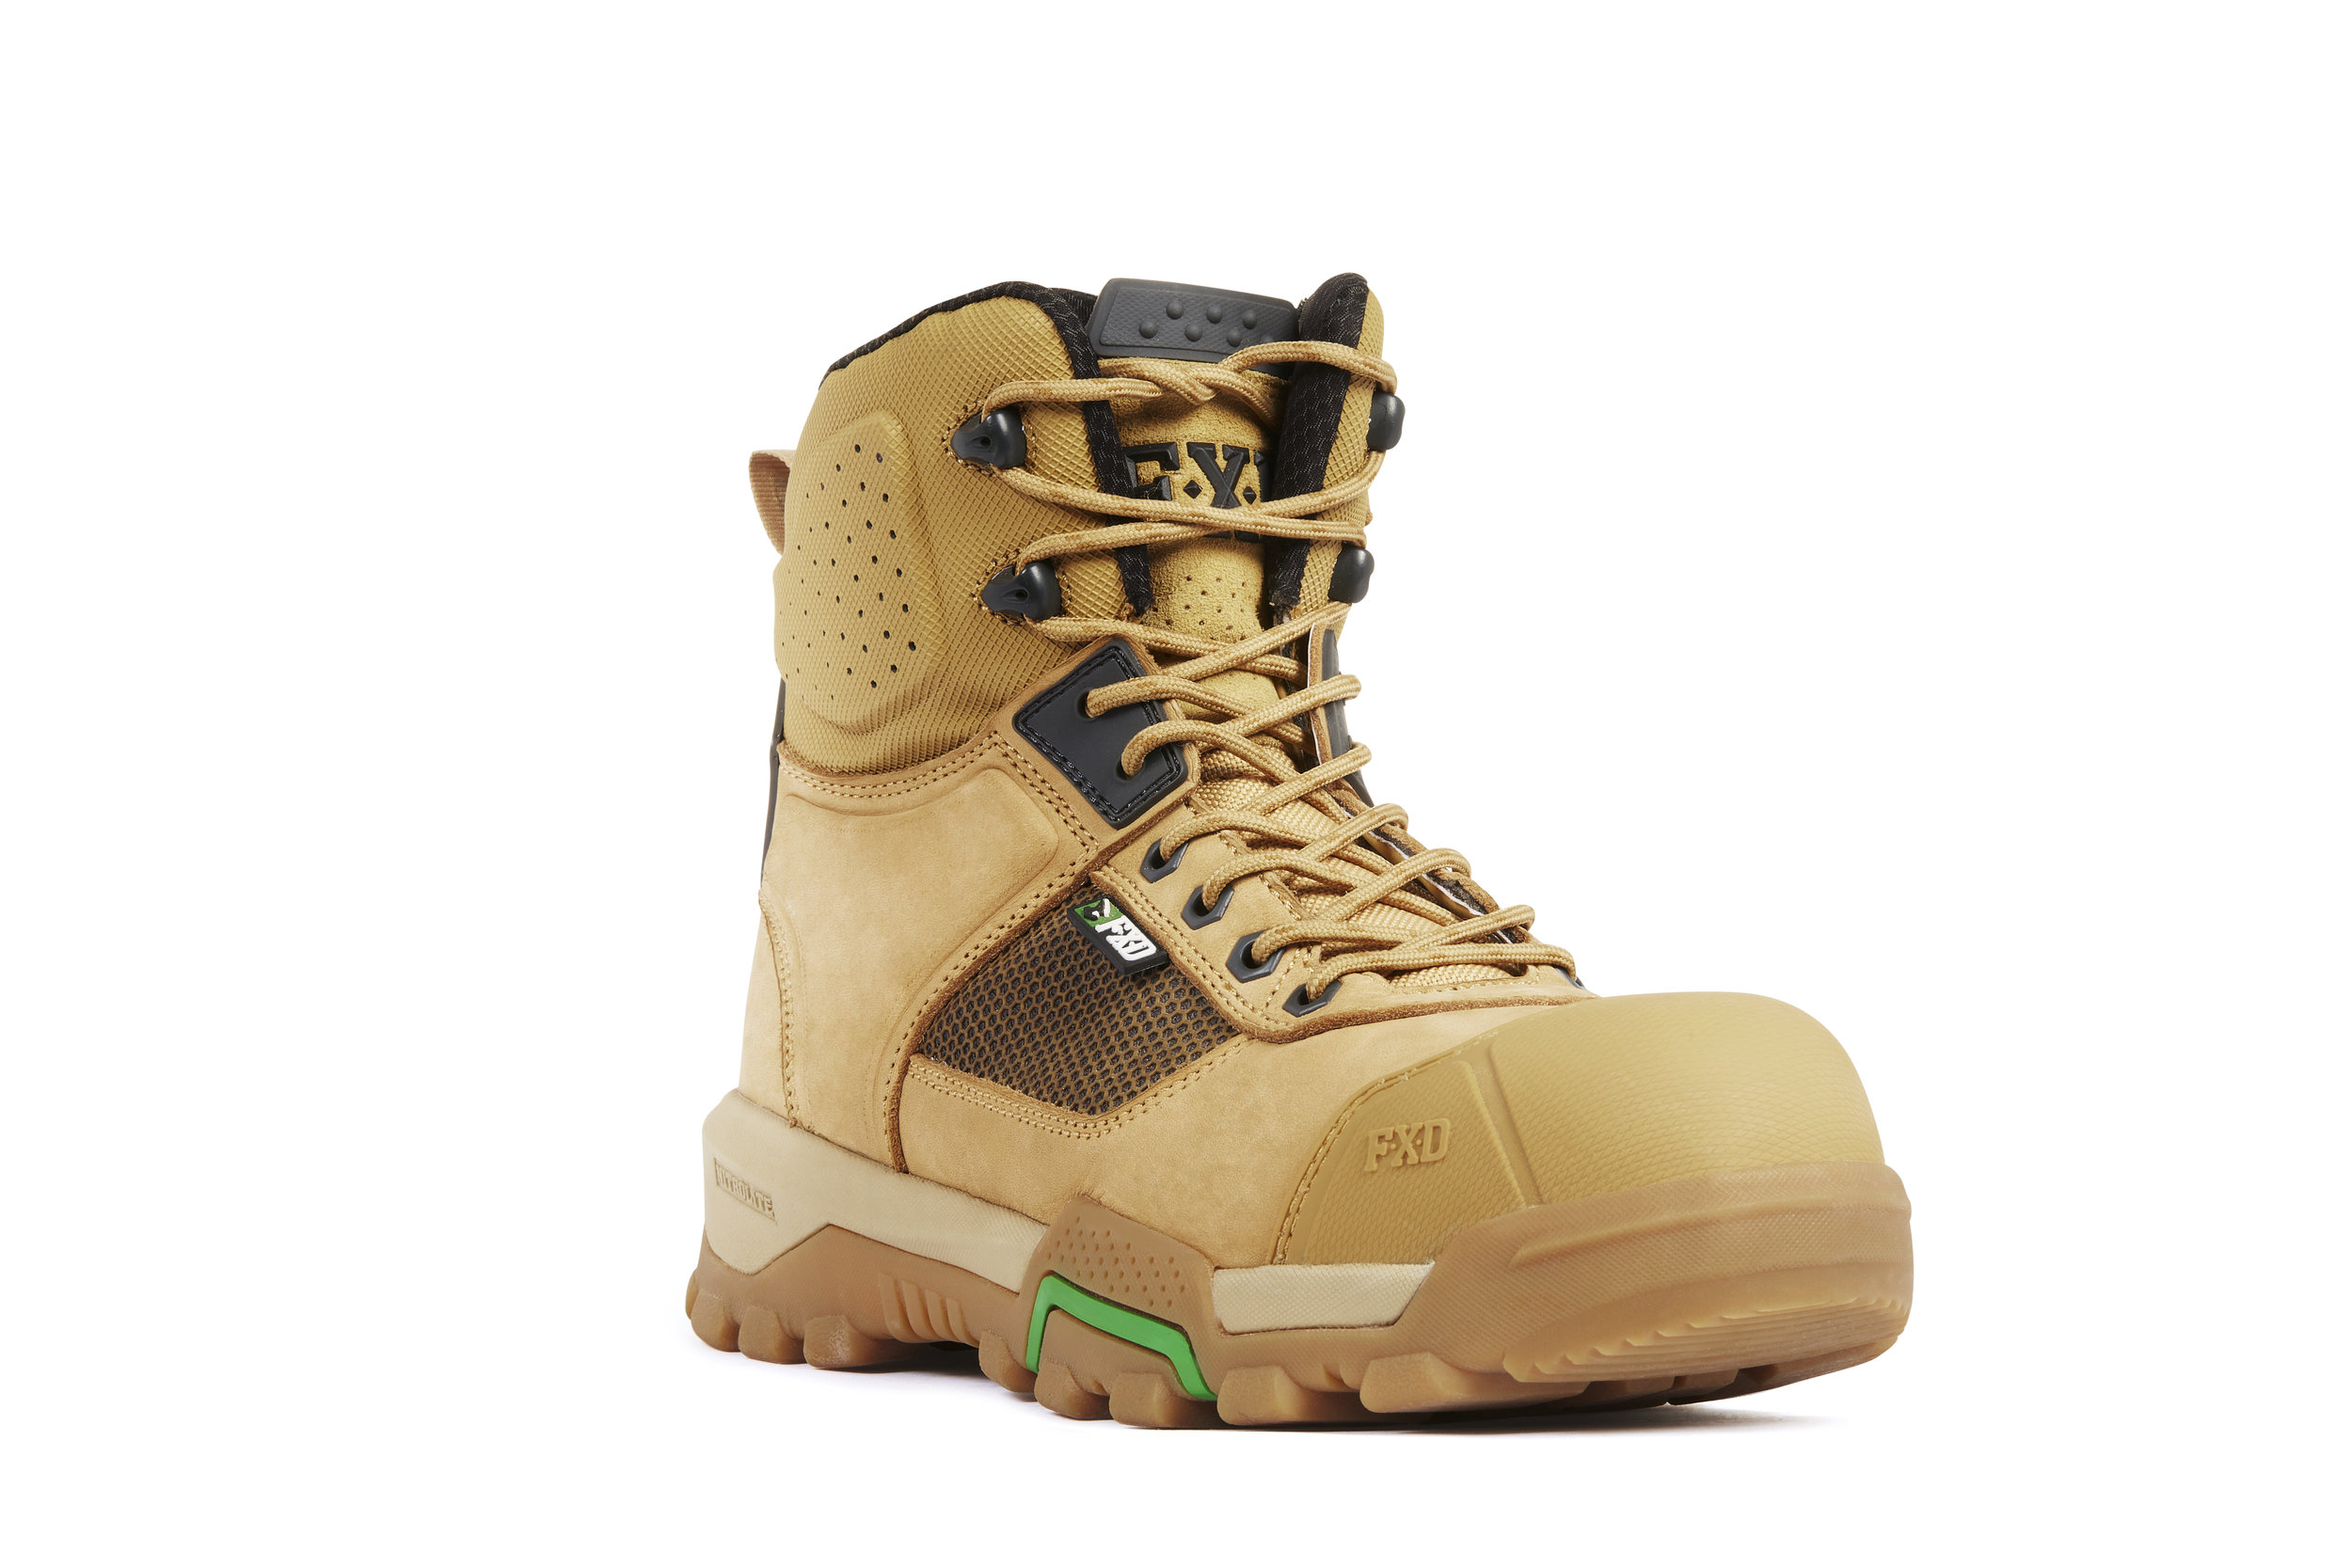 FXD WB-1 work boots (Wheat front view)